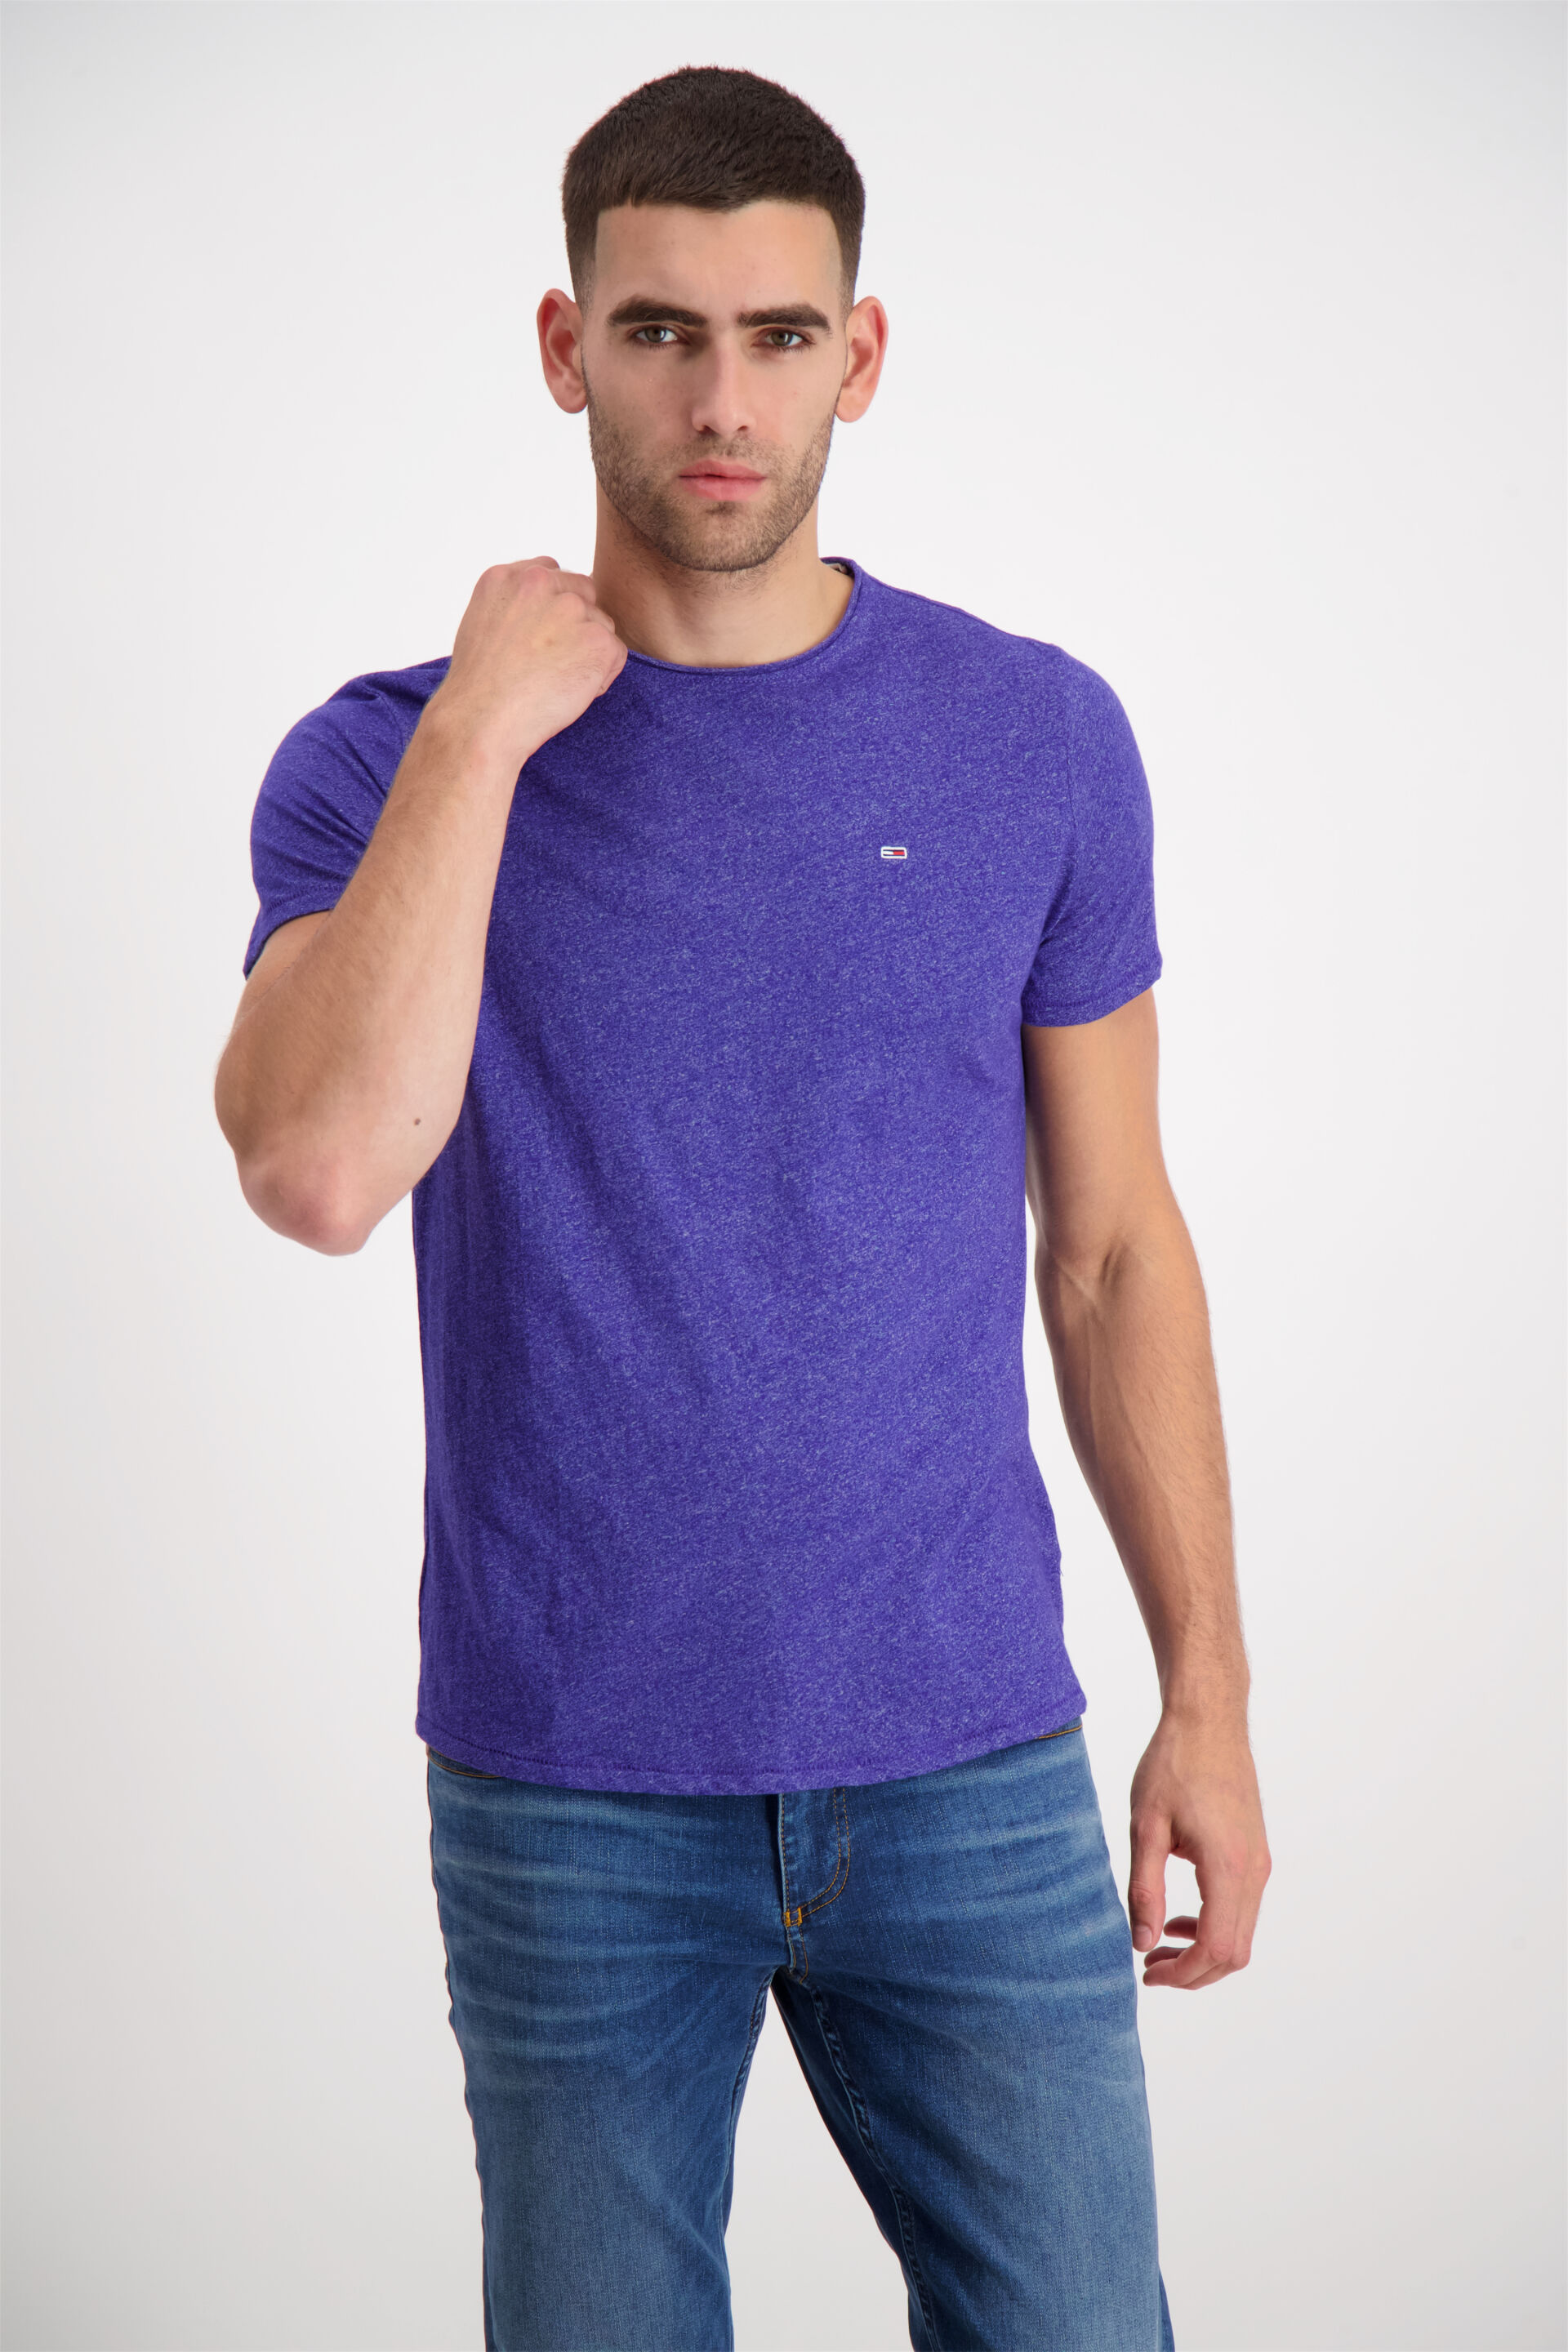 Tommy Jeans  T-shirt 90-400803